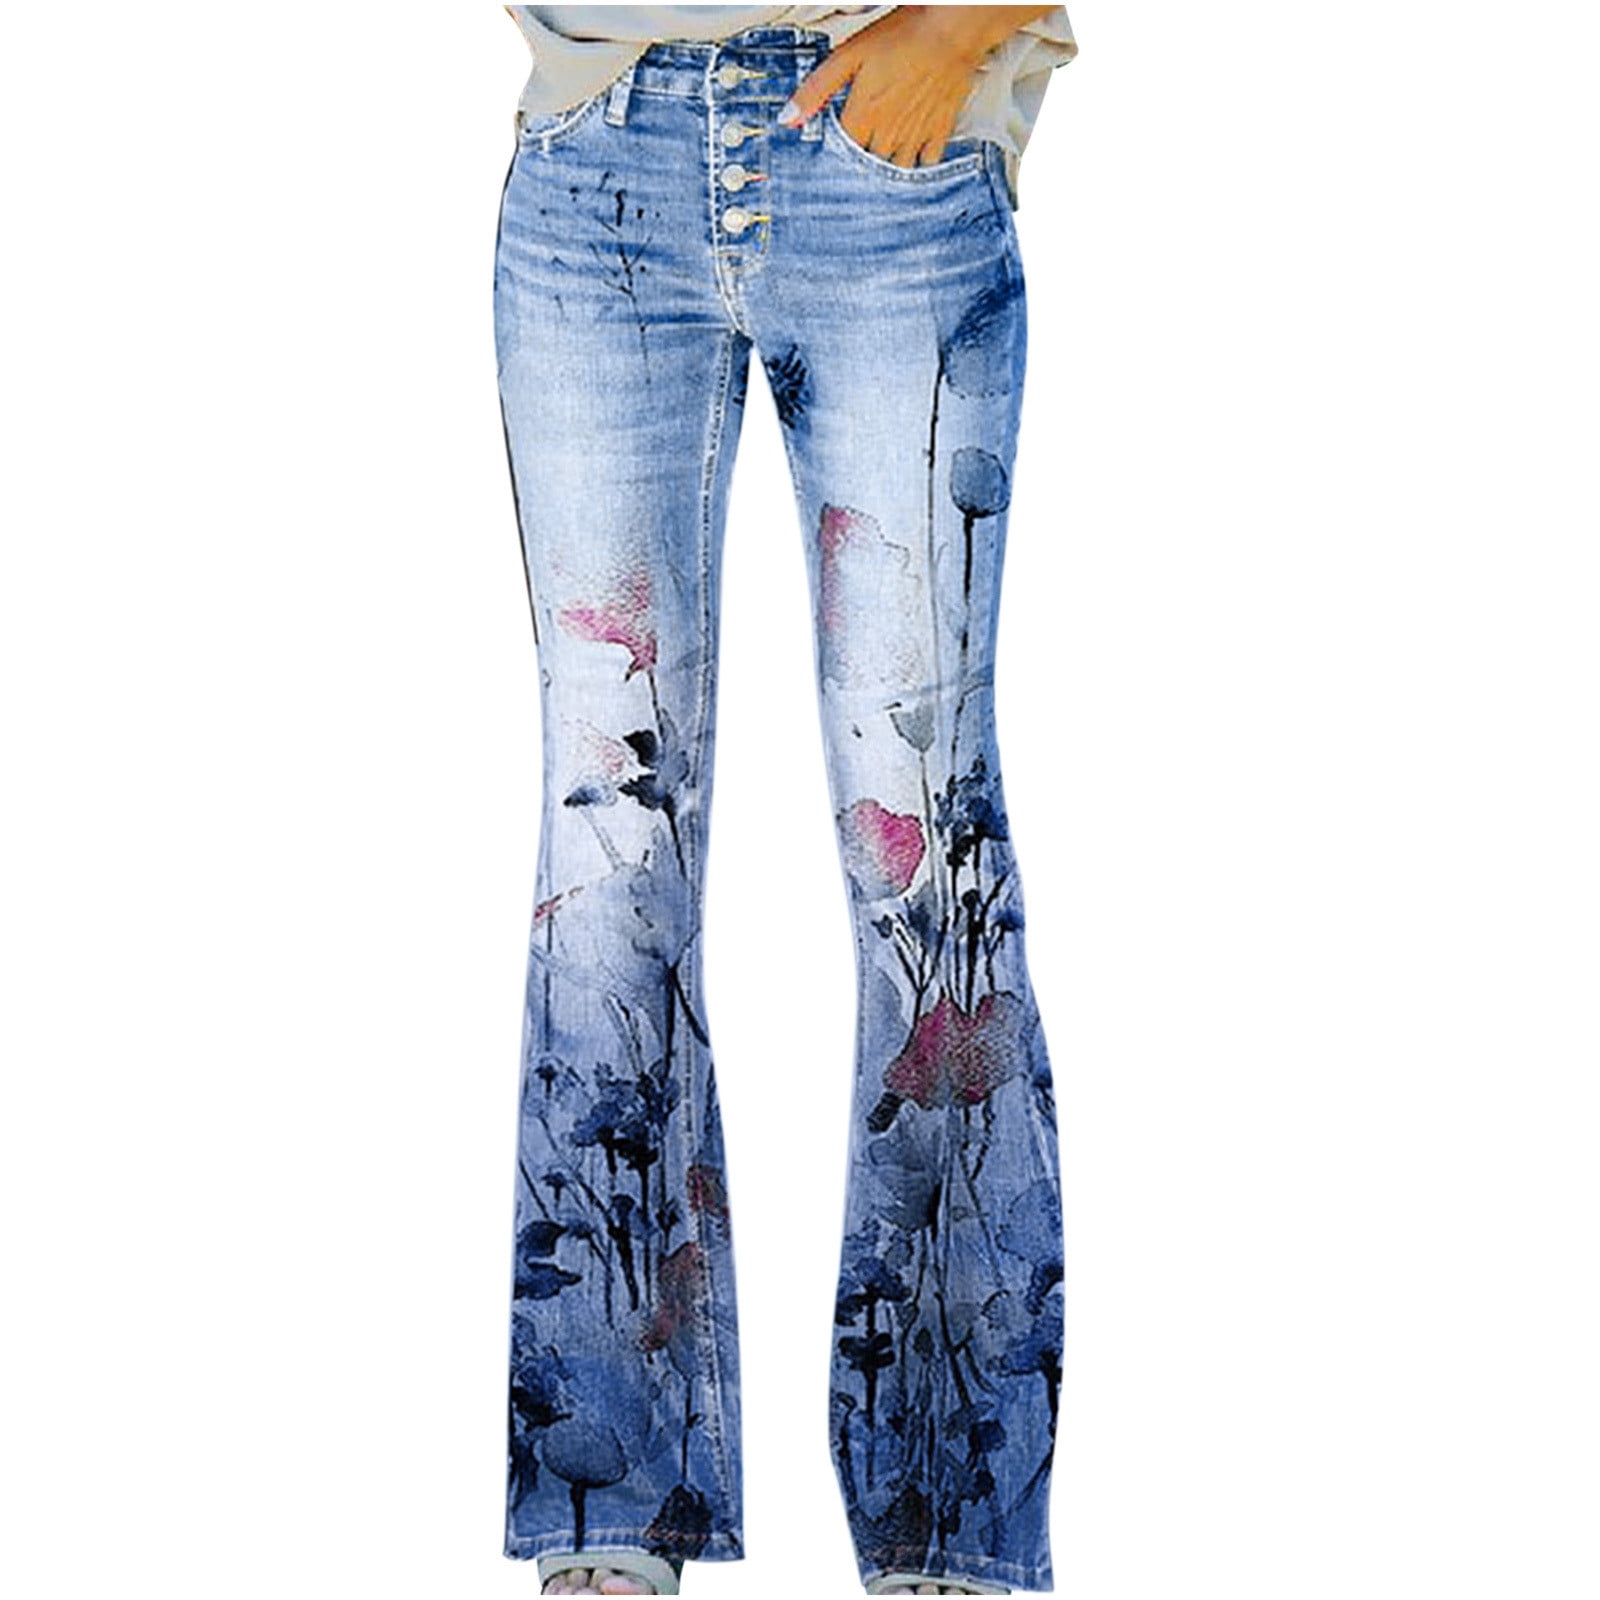 Floral Printed Flare Jeans for Women Patriotic Curvy Fit Stretchy